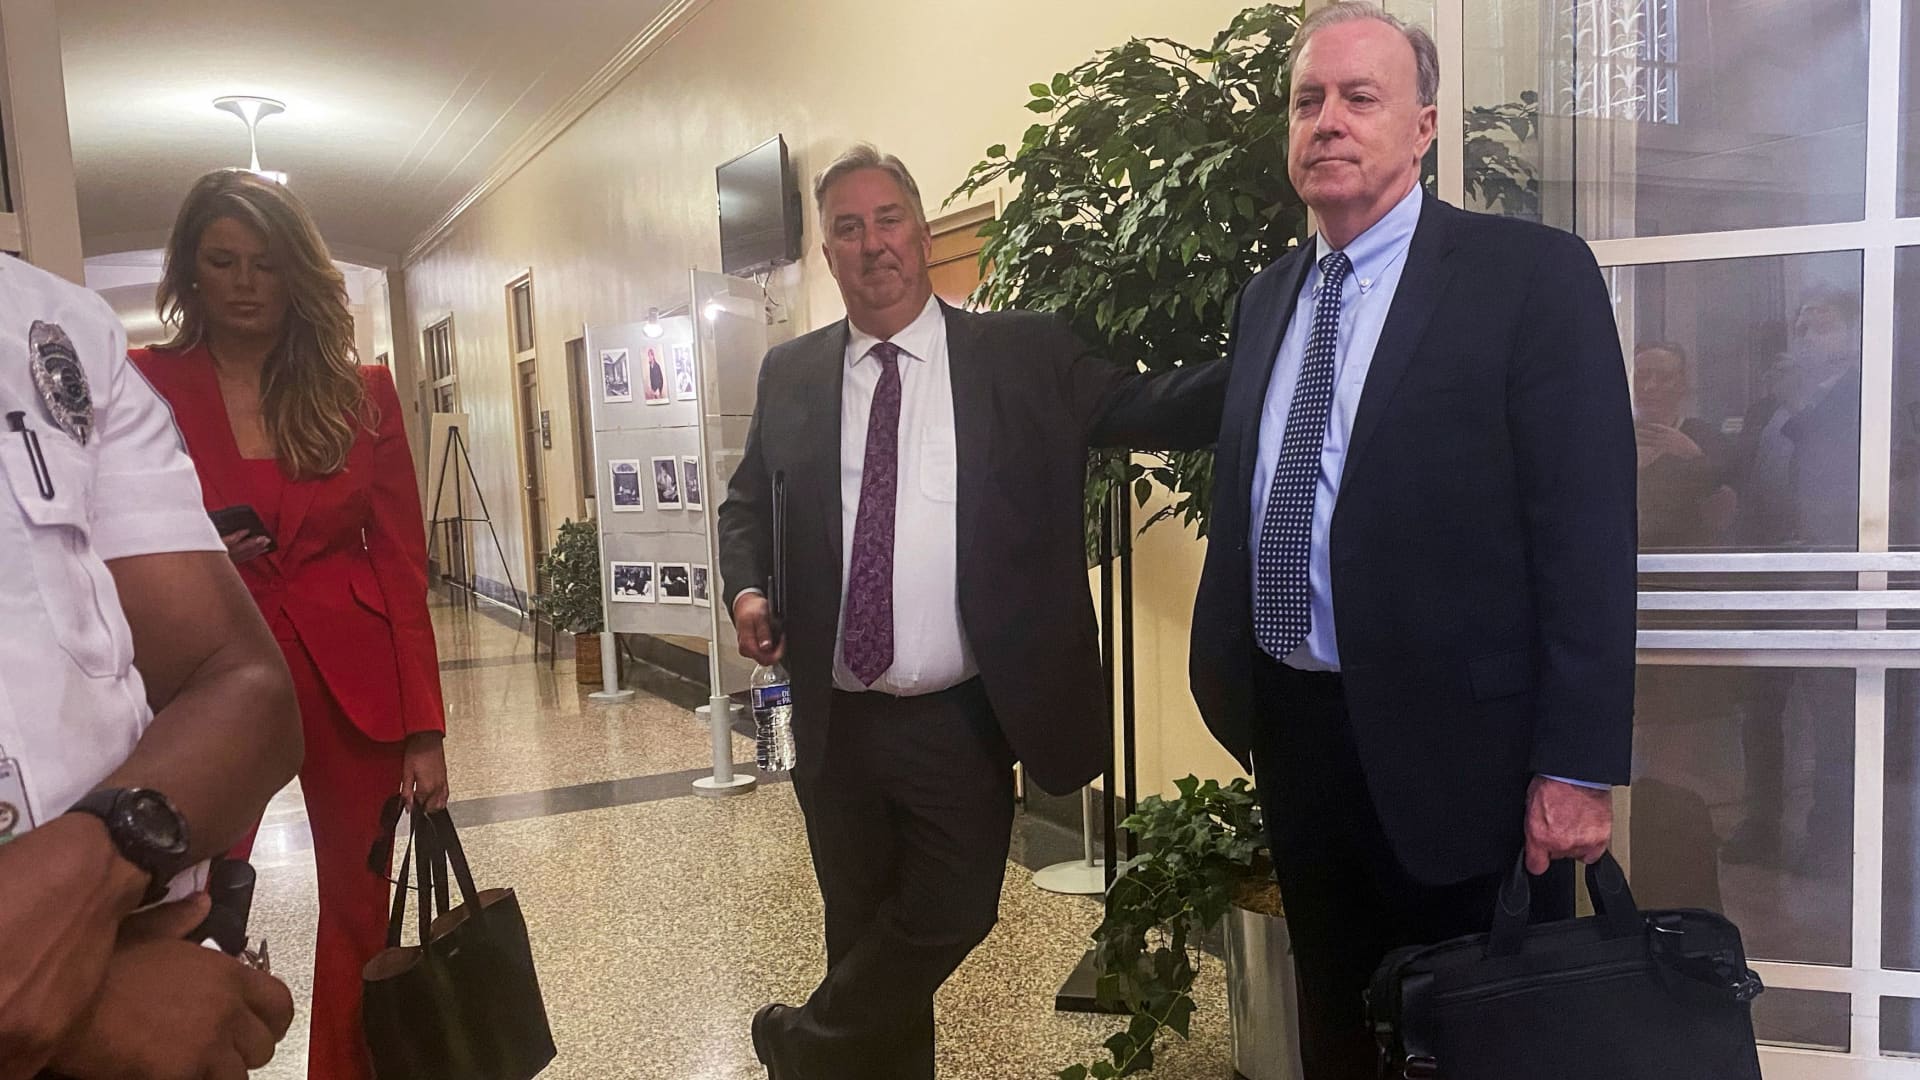 Lawyers for former U.S. President Donald Trump, including attorneys Lindsey Halligan, James Trusty and John Rowley, depart the U.S. Justice Department after meeting with Justice Department officials over the Trump Mar-a-Lago classified documents case, after Trump's lawyers last month sent the department a letter asking for a meeting with U.S. Attorney General Merrick Garland, in Washington, U.S. June 5, 2023. 